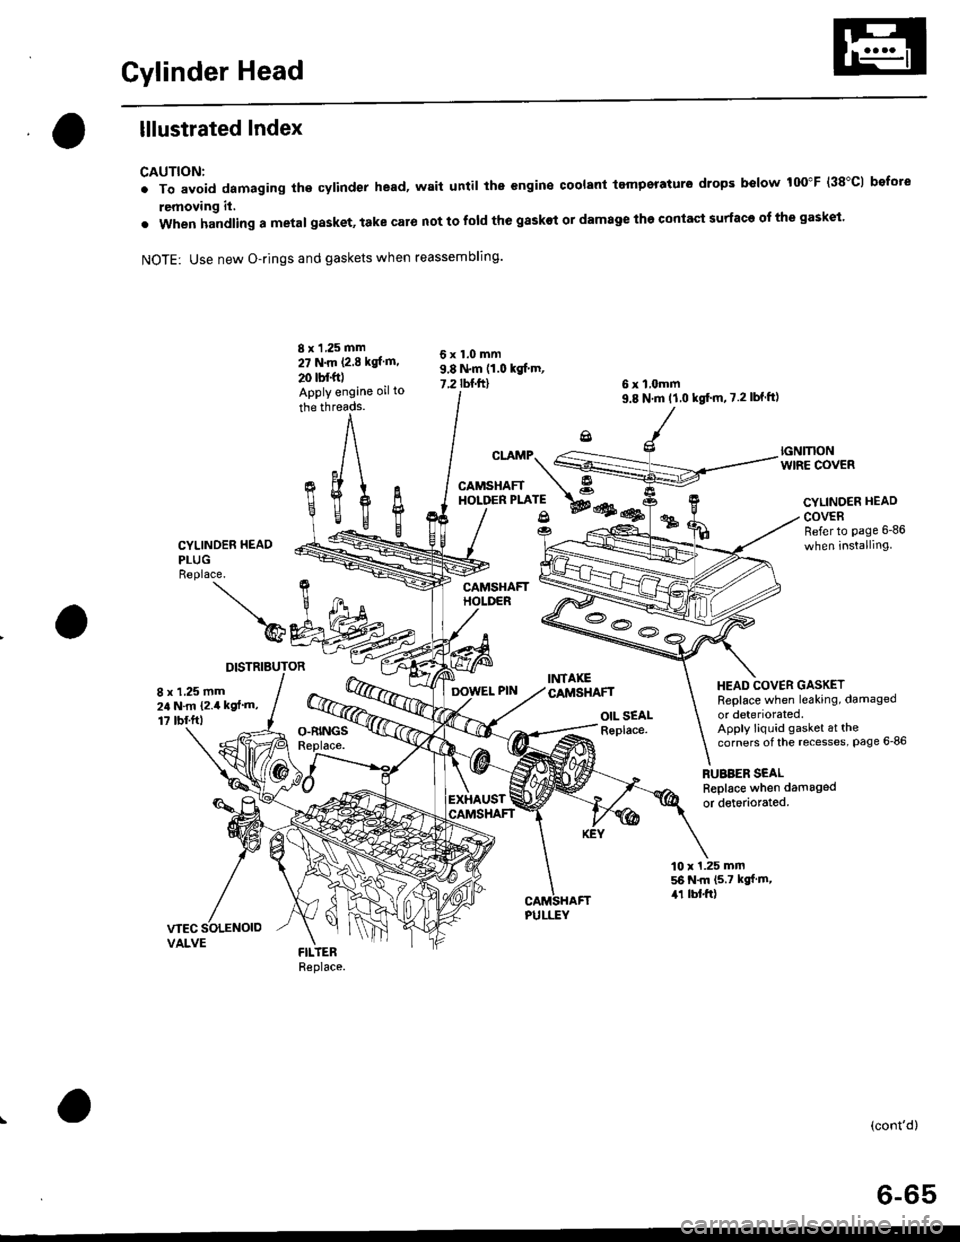 HONDA CIVIC 1999 6.G Workshop Manual Cylinder Head
lllustrated Index
CAUTION:
. To avoid damaging the cylinder head, wait until the engine coolant tempsraturo drops below 100"F (38"C1 bofote
removing it,
. when handling a metal gasket, t